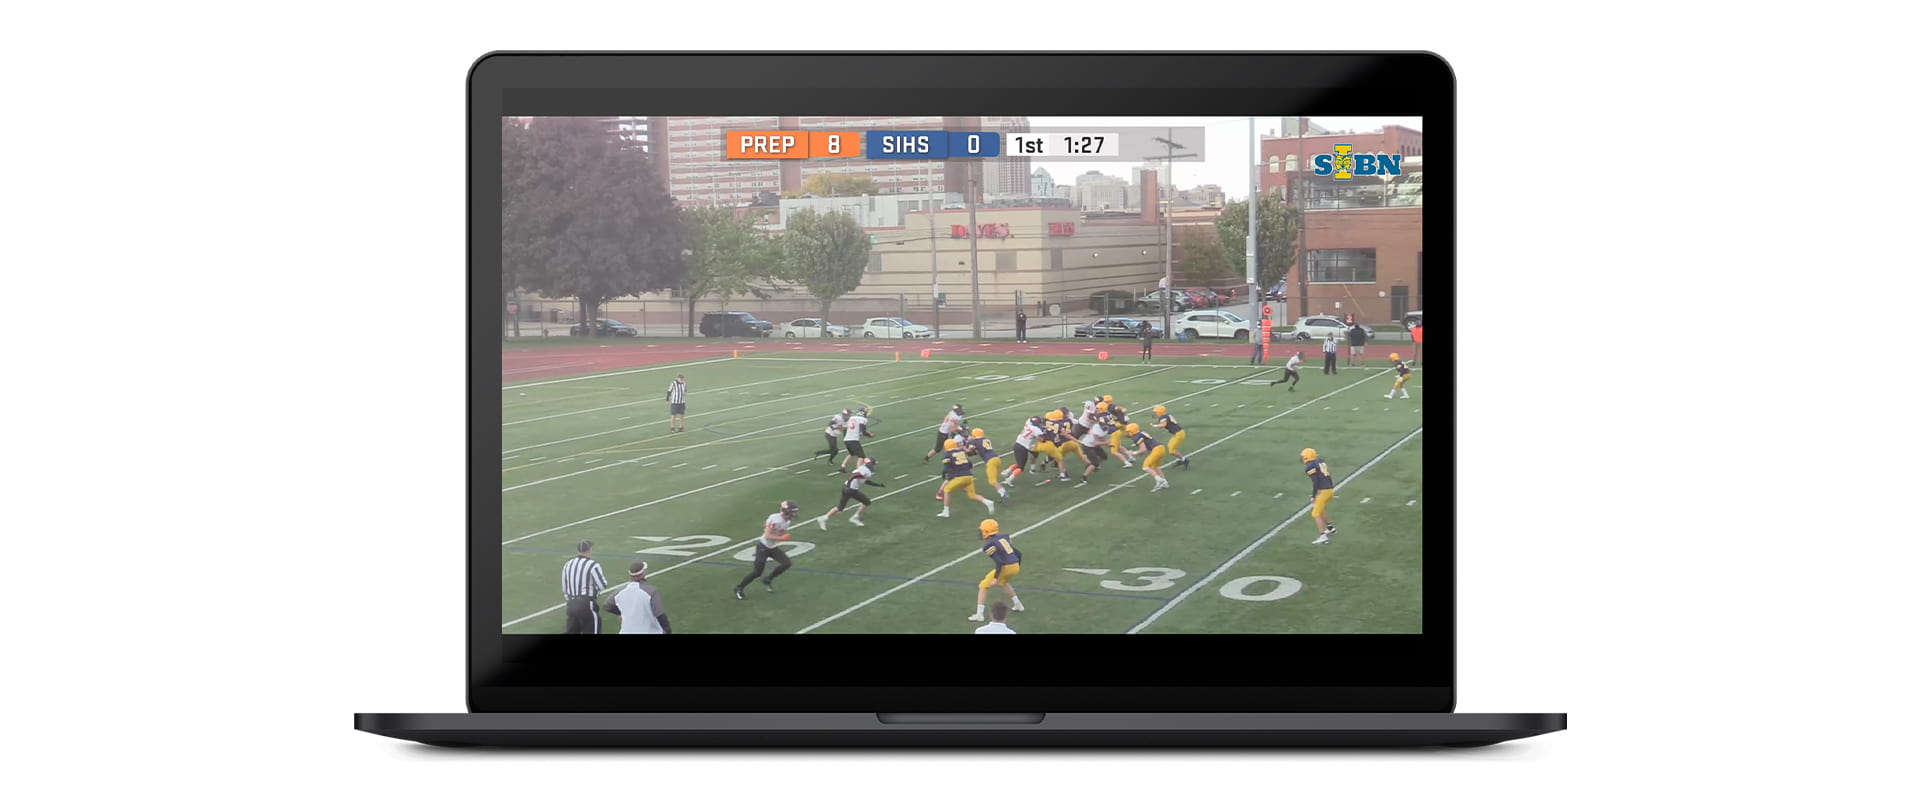 Football game live stream with scoreboard overlay